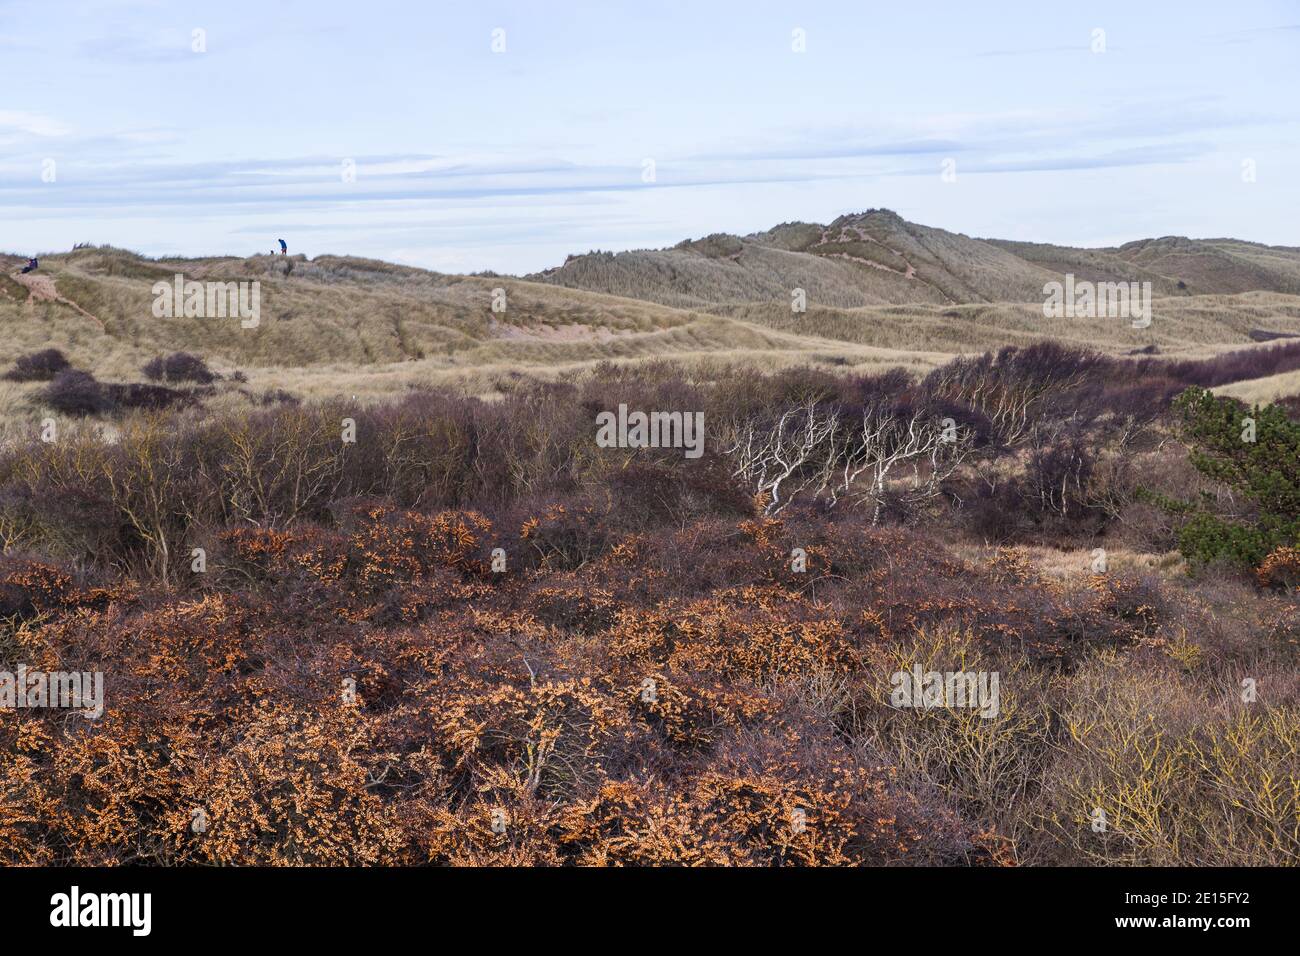 The changing landscape and colours as Formby Woods merges into the Marram grass covered sand dunes. Stock Photo